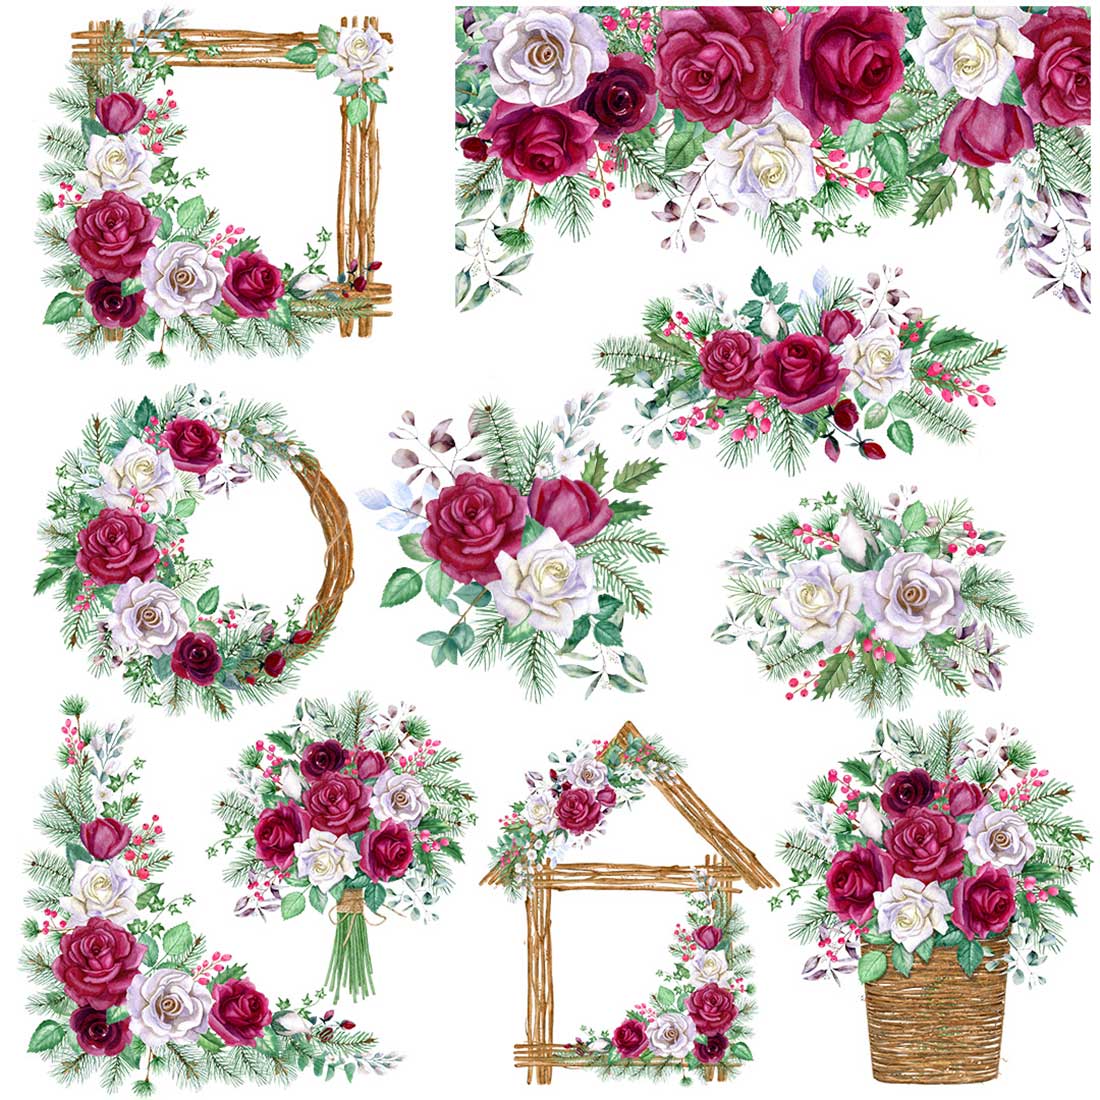 Red and white flowers with frames and more.